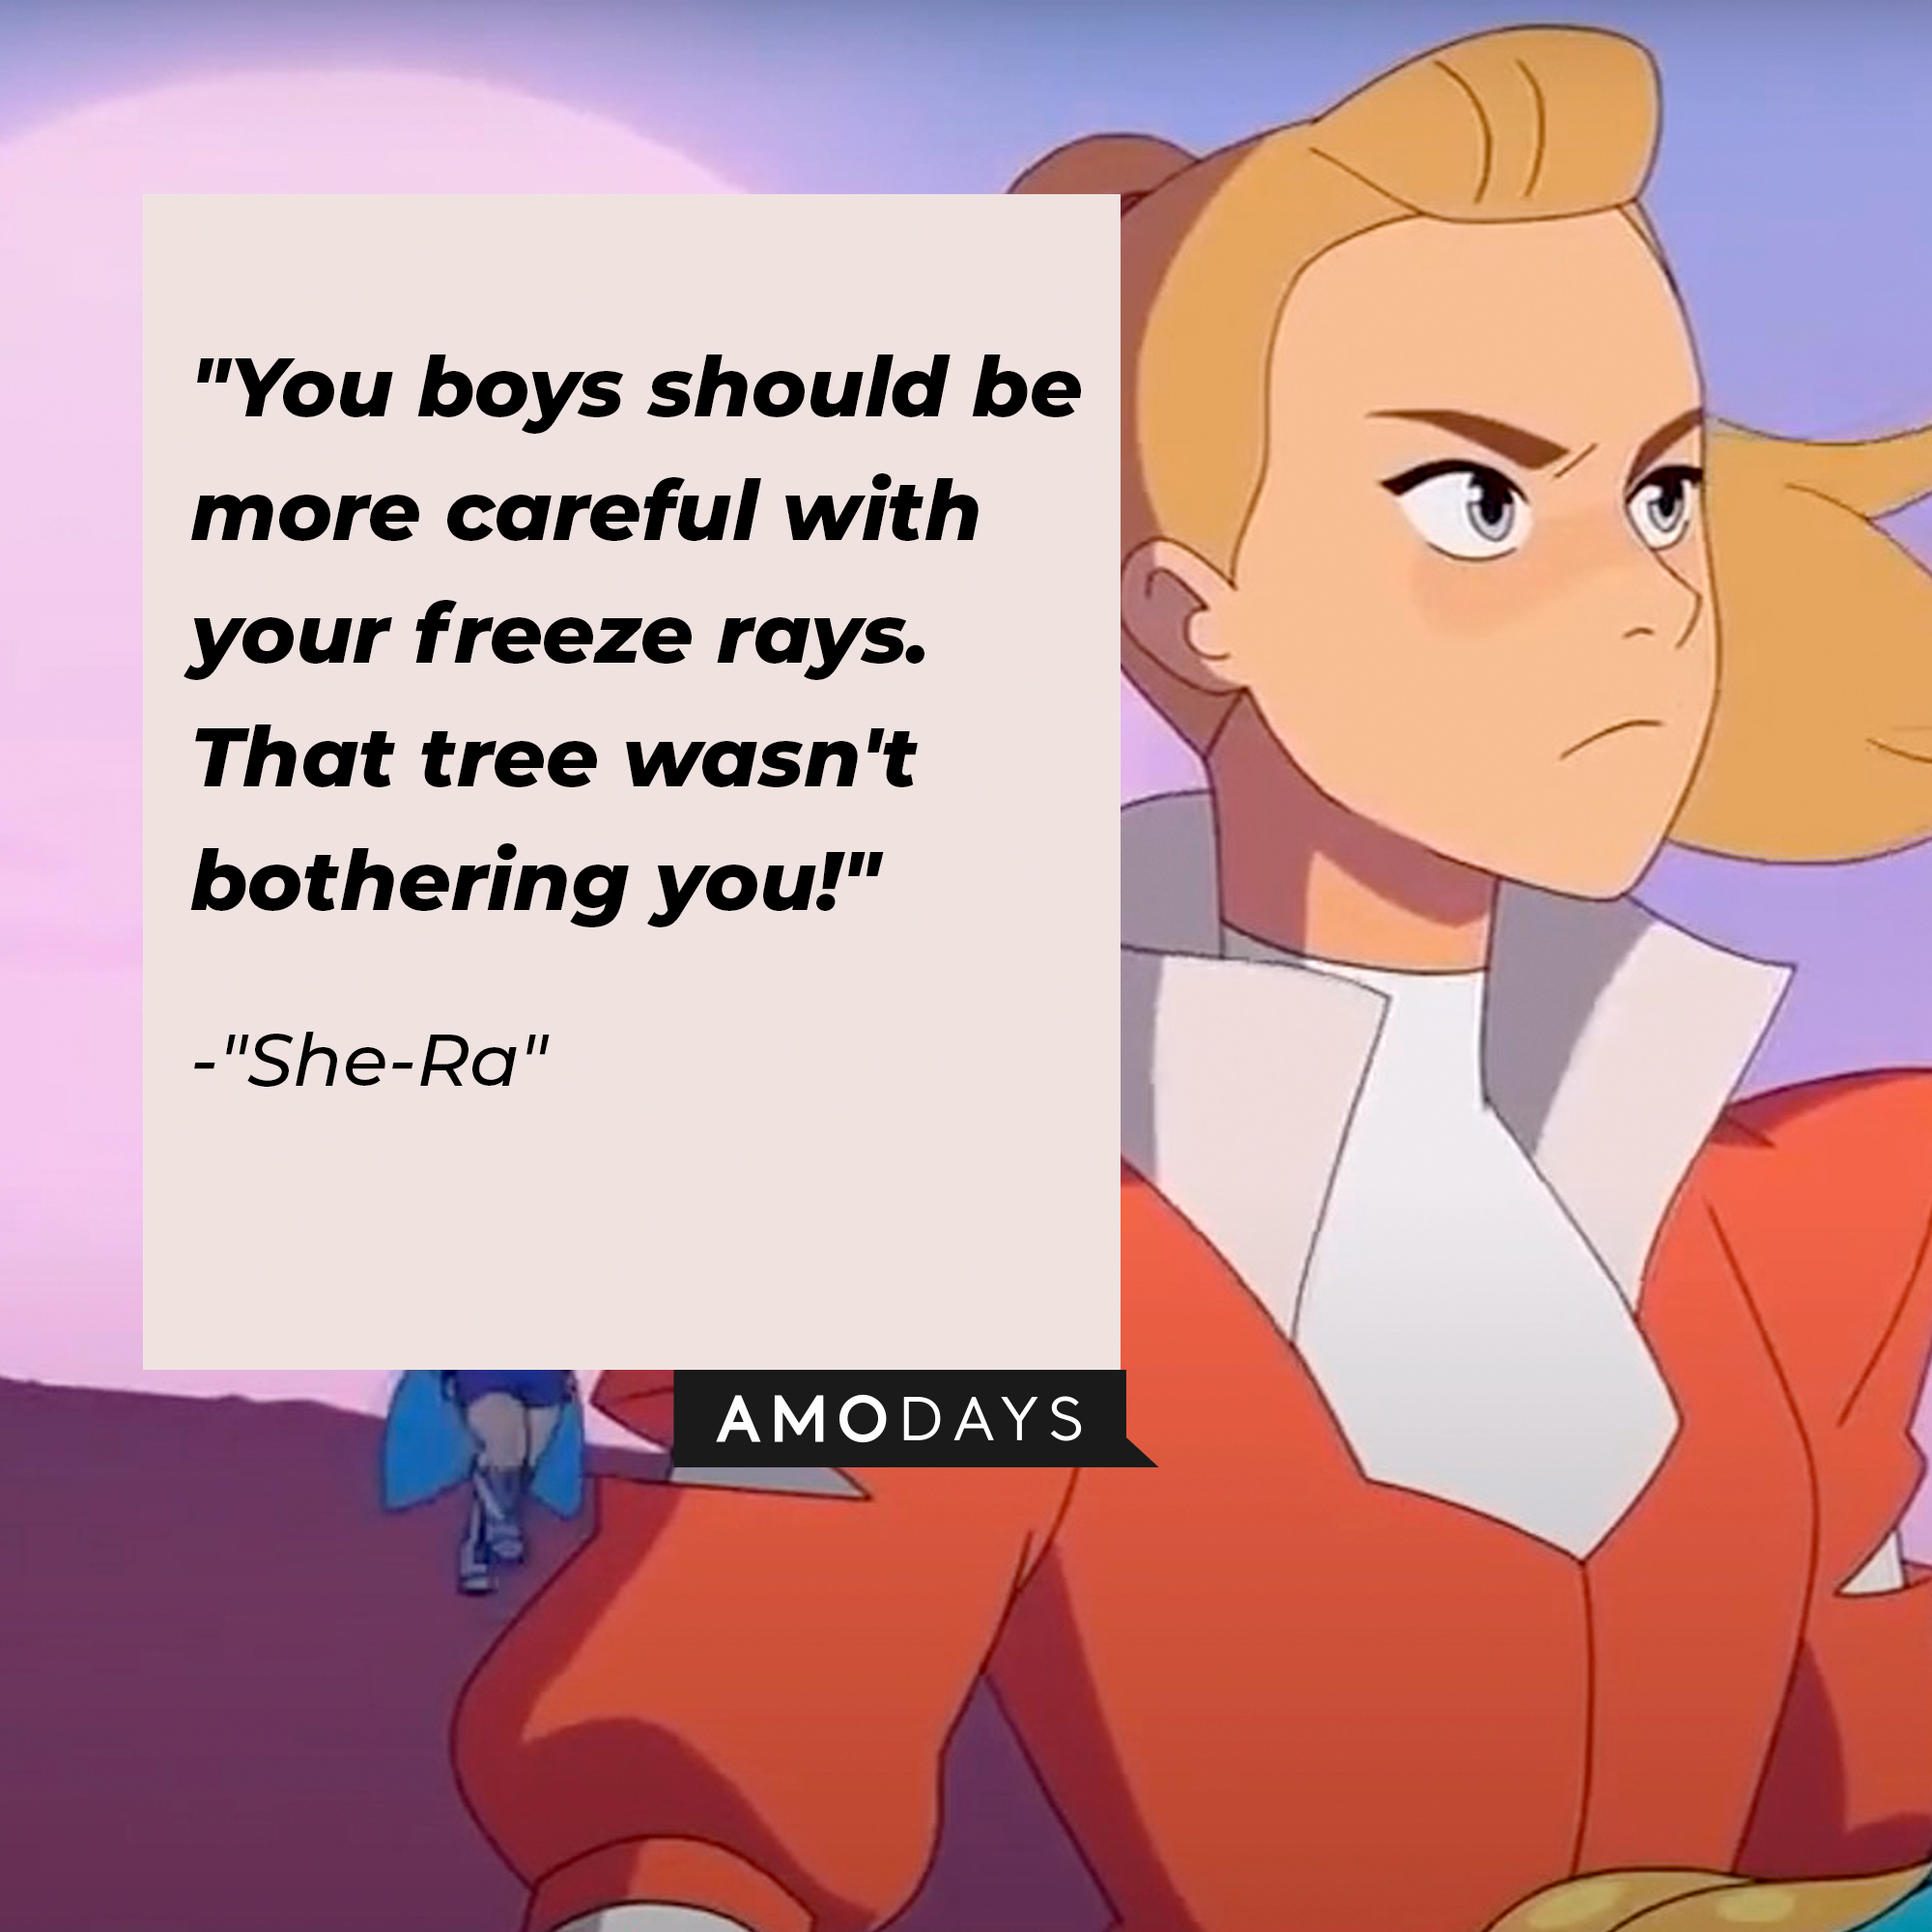 "She-Ra's" quote: "You boys should be more careful with your freeze rays. That tree wasn't bothering you!" | Source: Facebook.com/DreamWorksSheRa